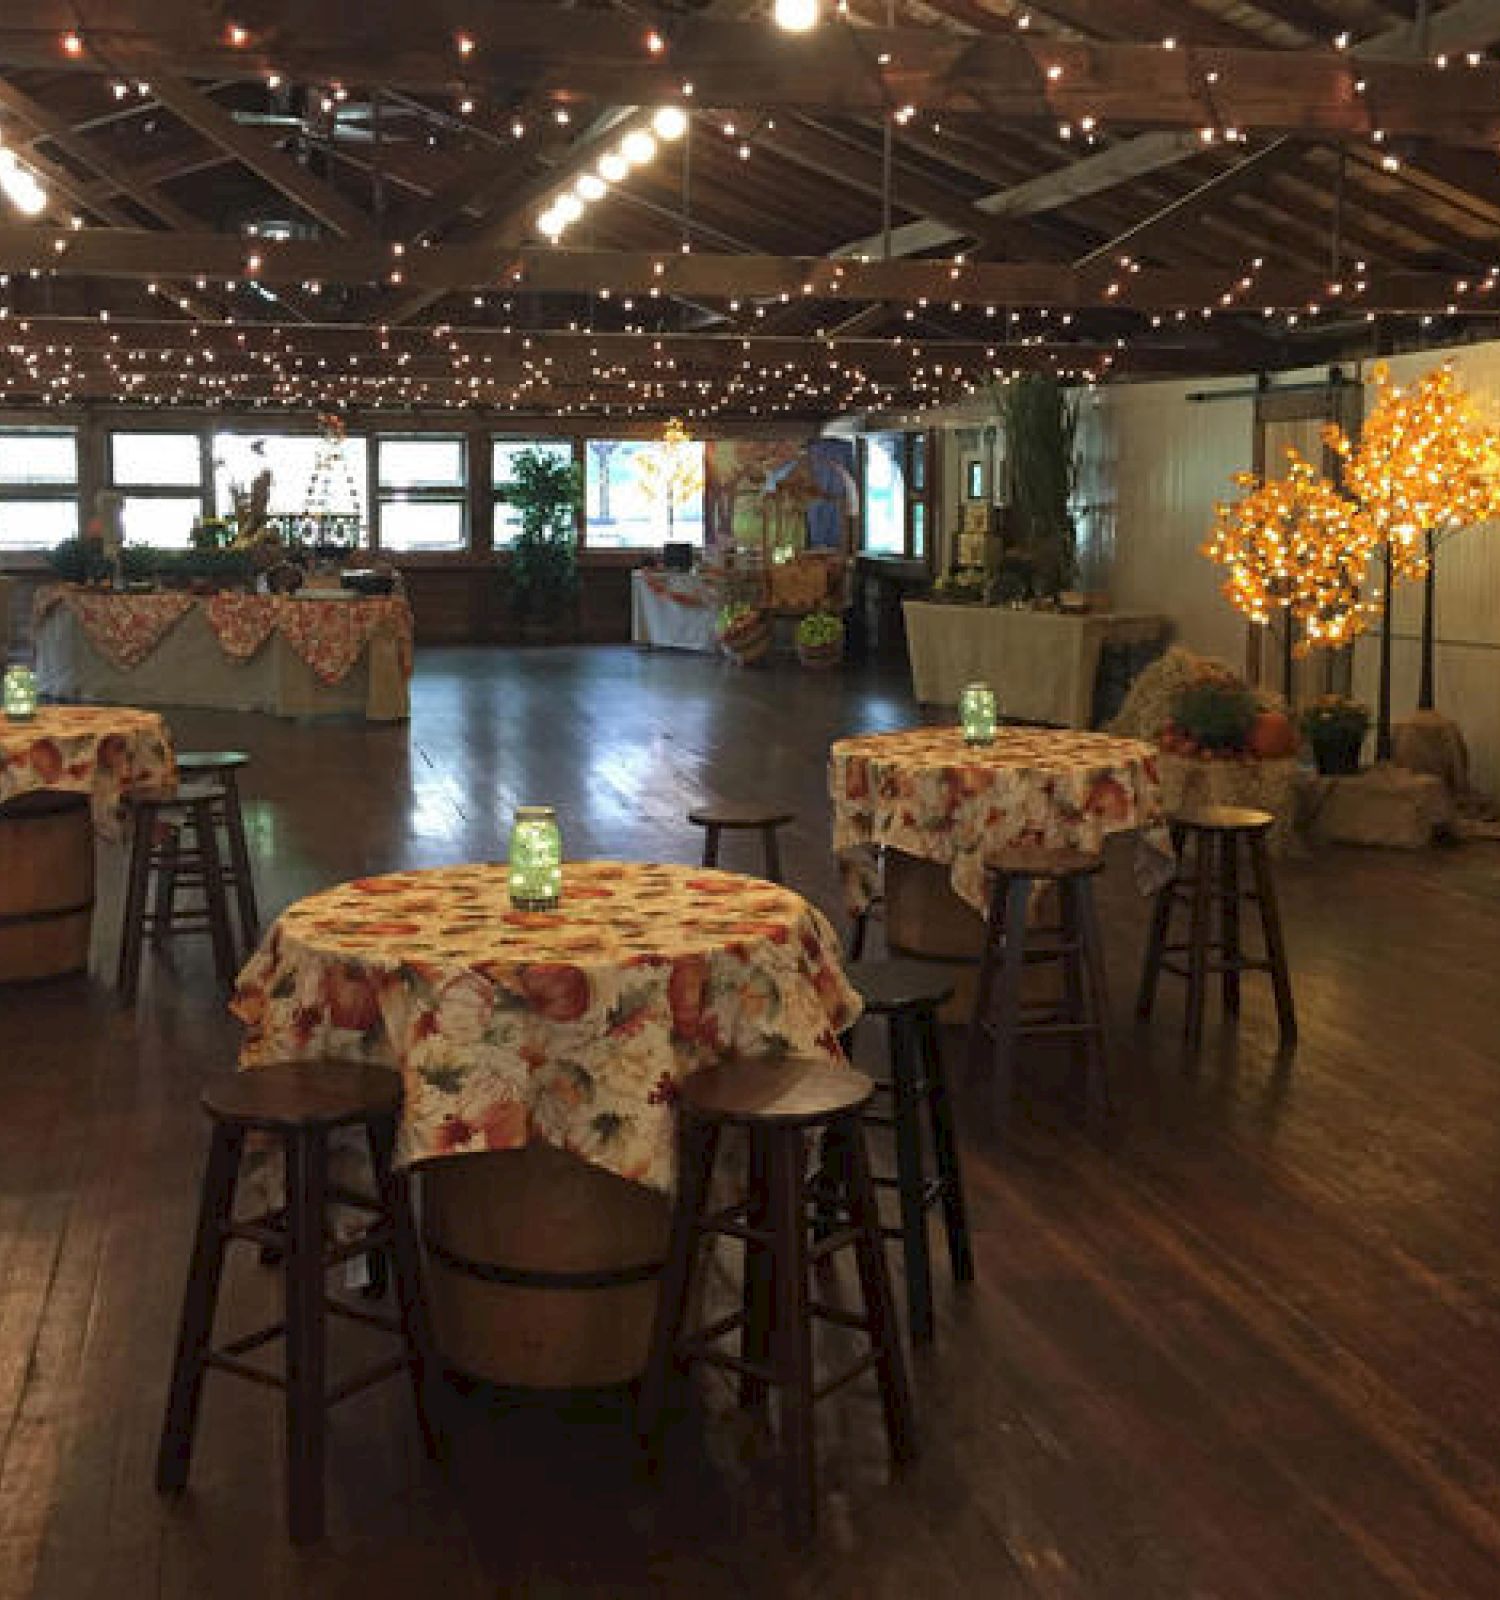 Cozy indoor event space with tables, festive decor, string lights, and a fireplace.